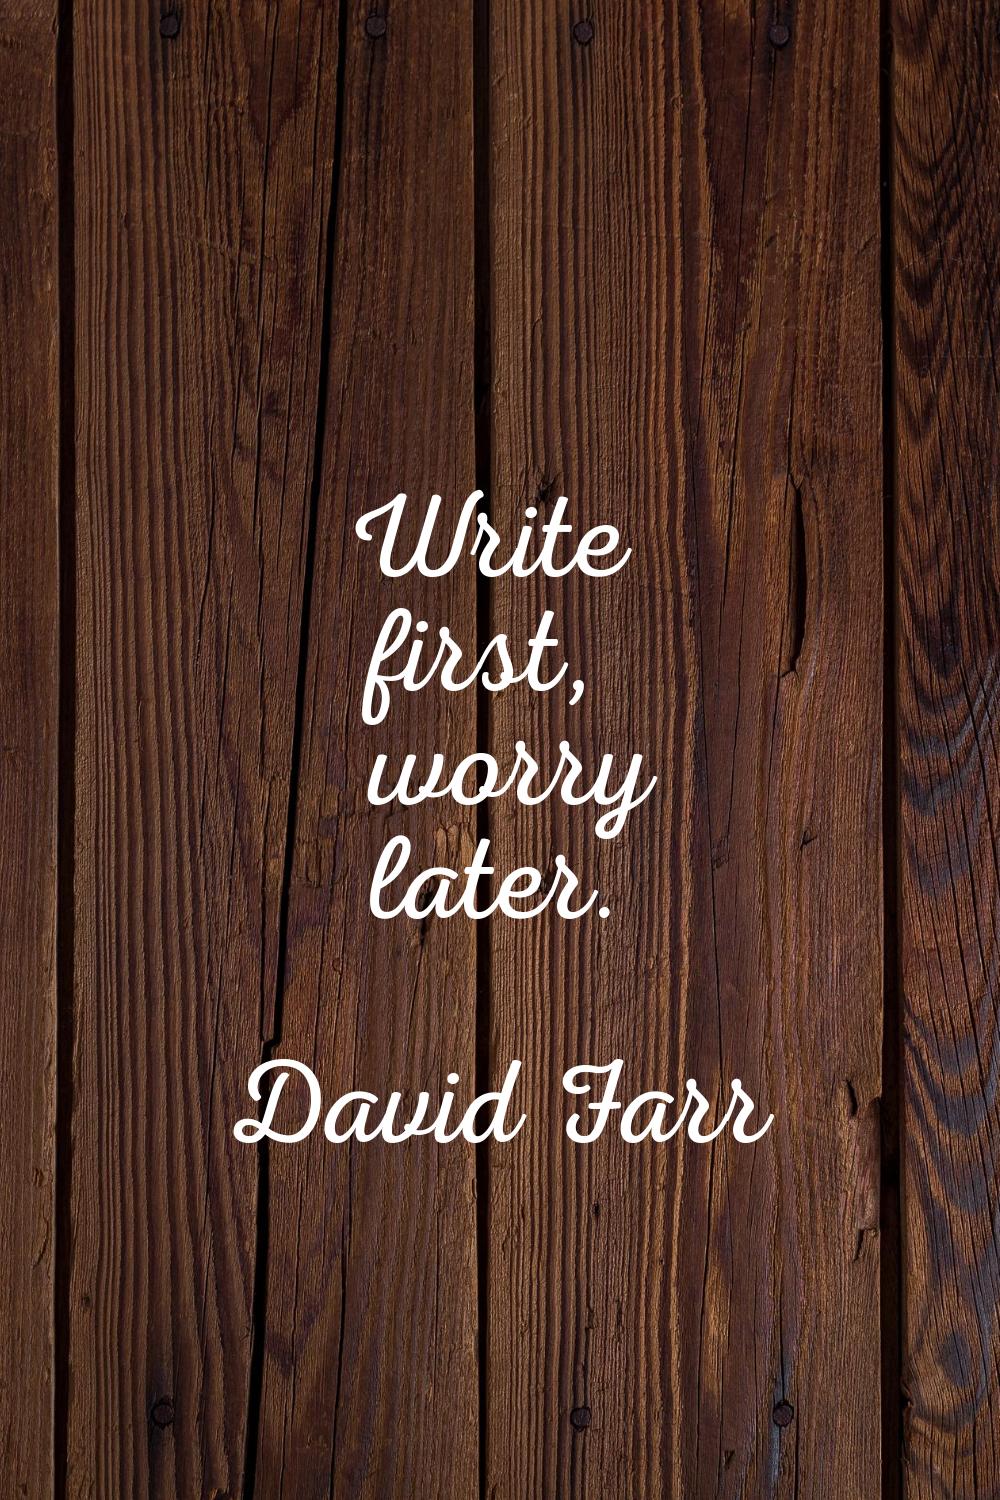 Write first, worry later.